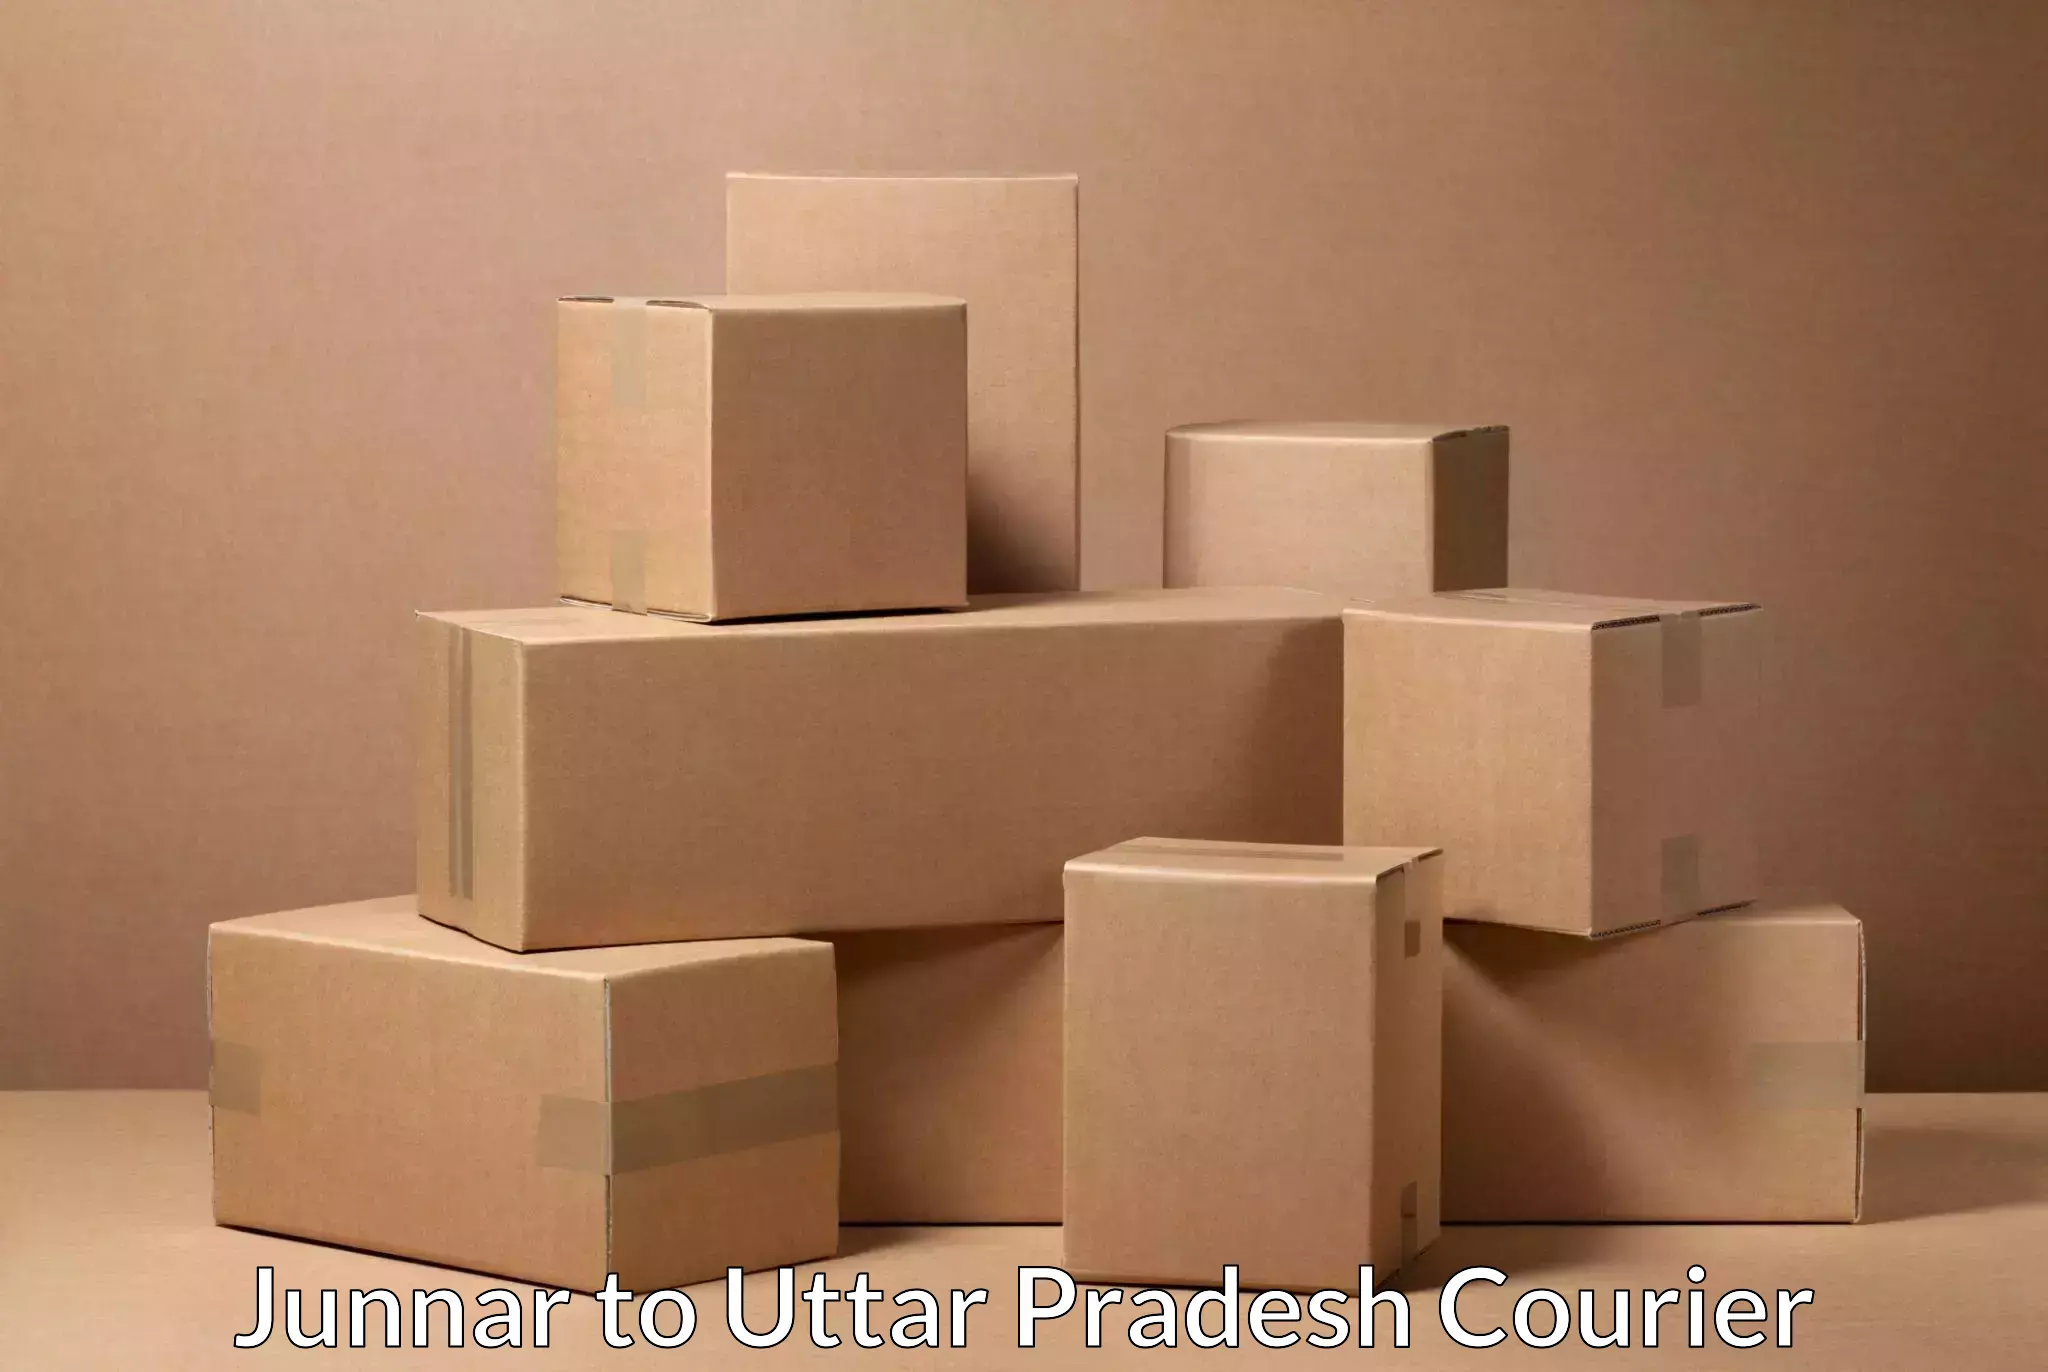 Nationwide parcel services Junnar to Shahjahanpur